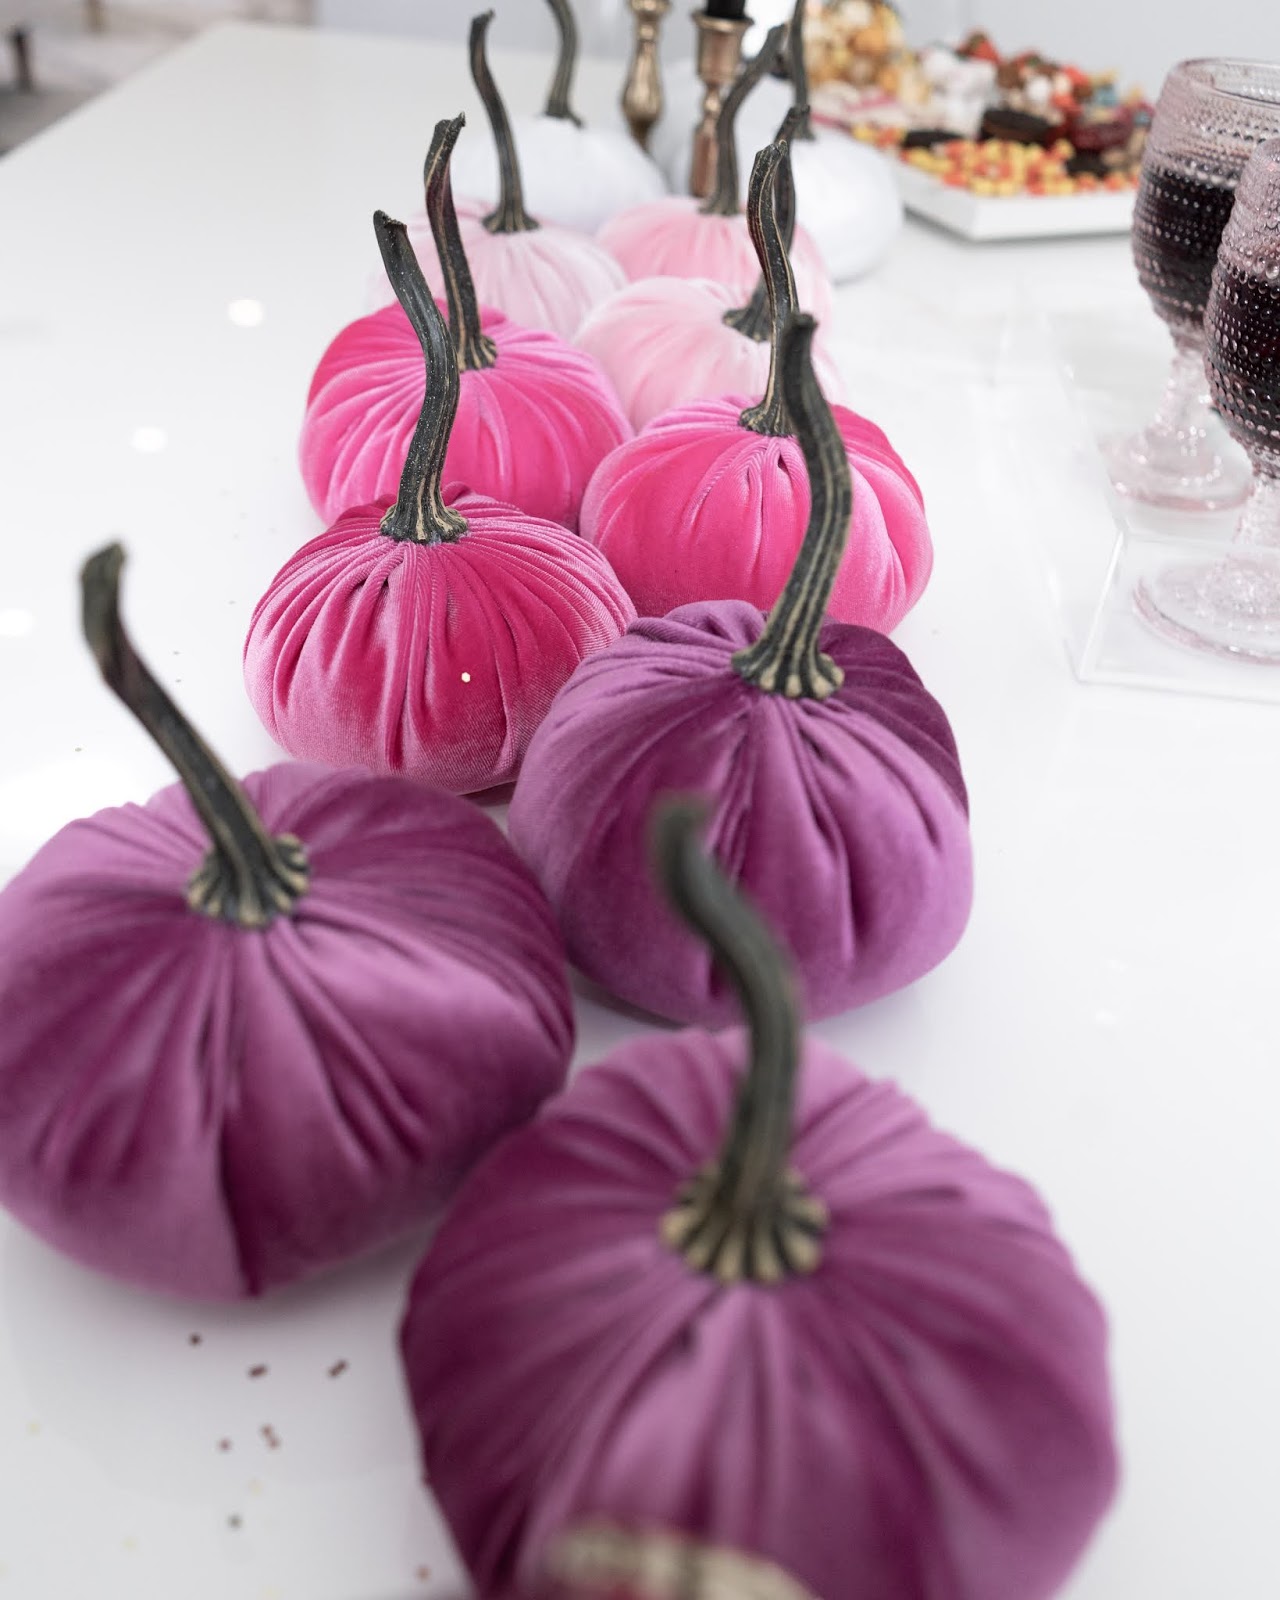 Velvet pumpkins in pink and purple for halloween party